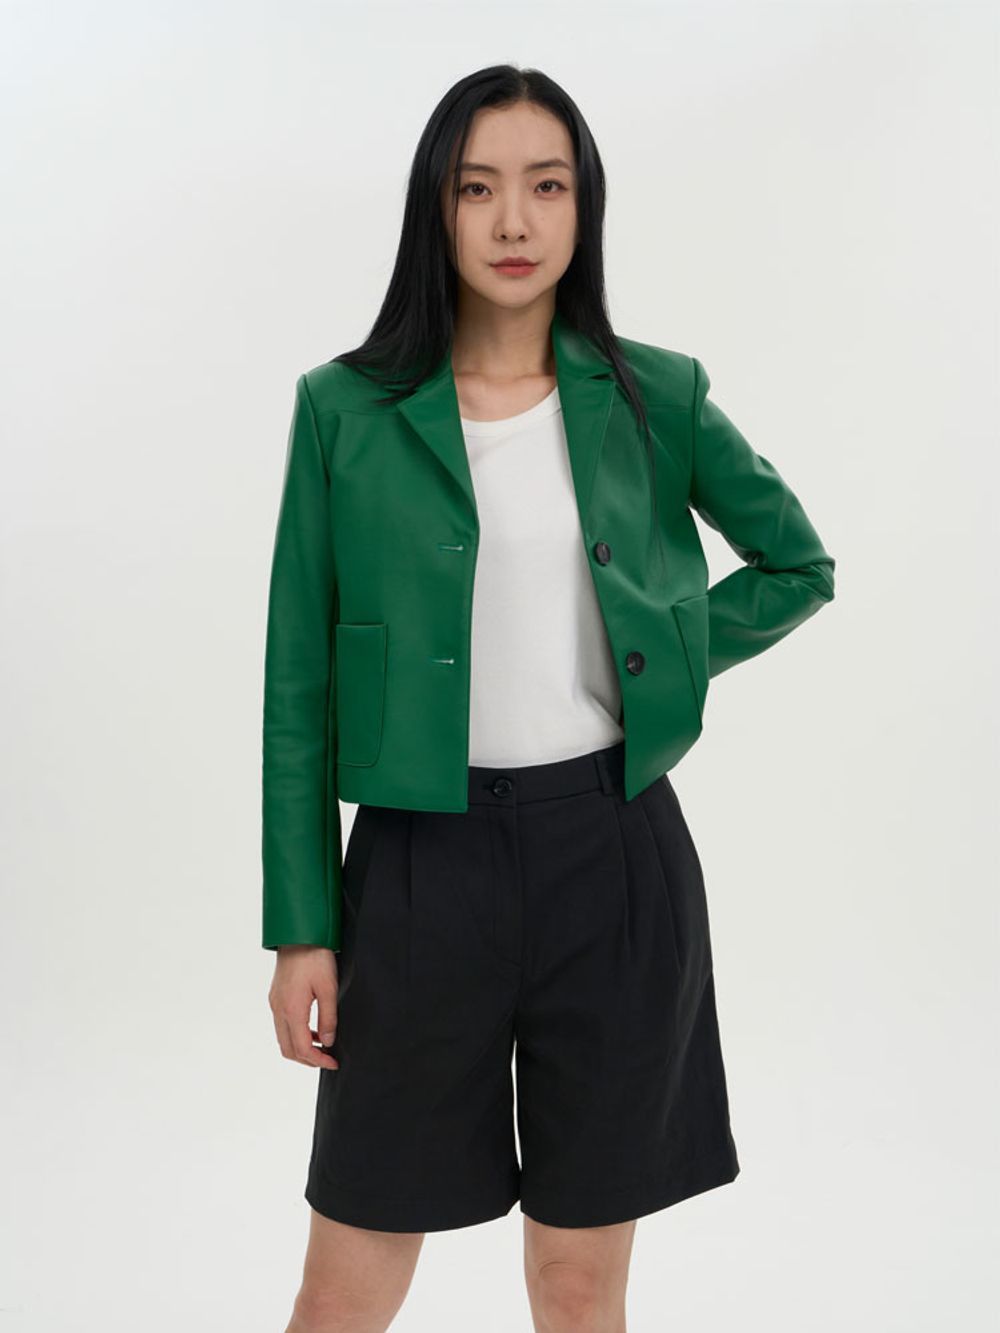 [Limited edition] Fake leather green jacket